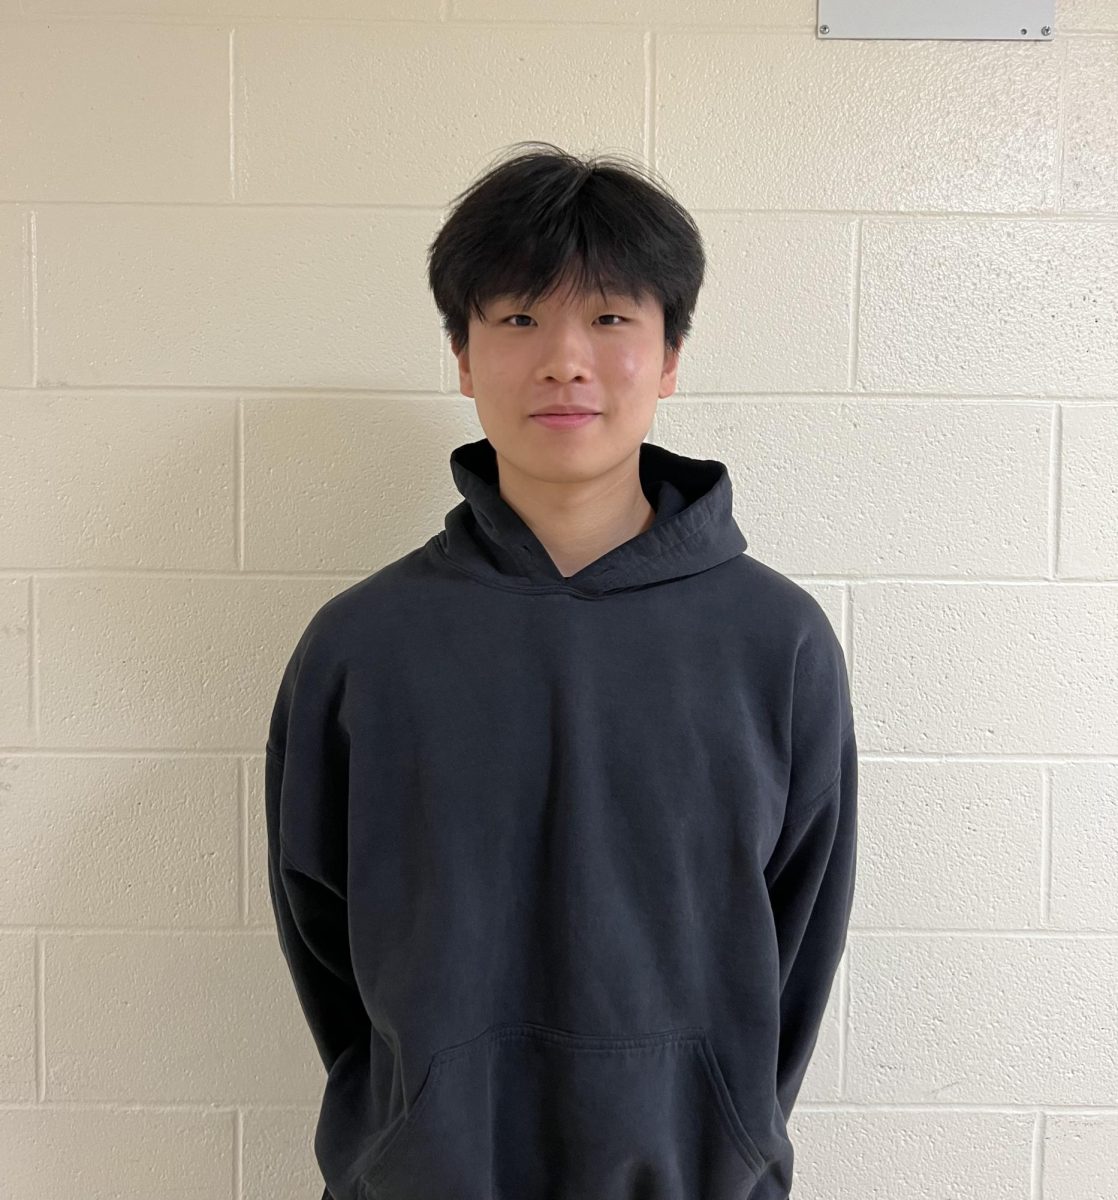 Student feature: Fred Lim